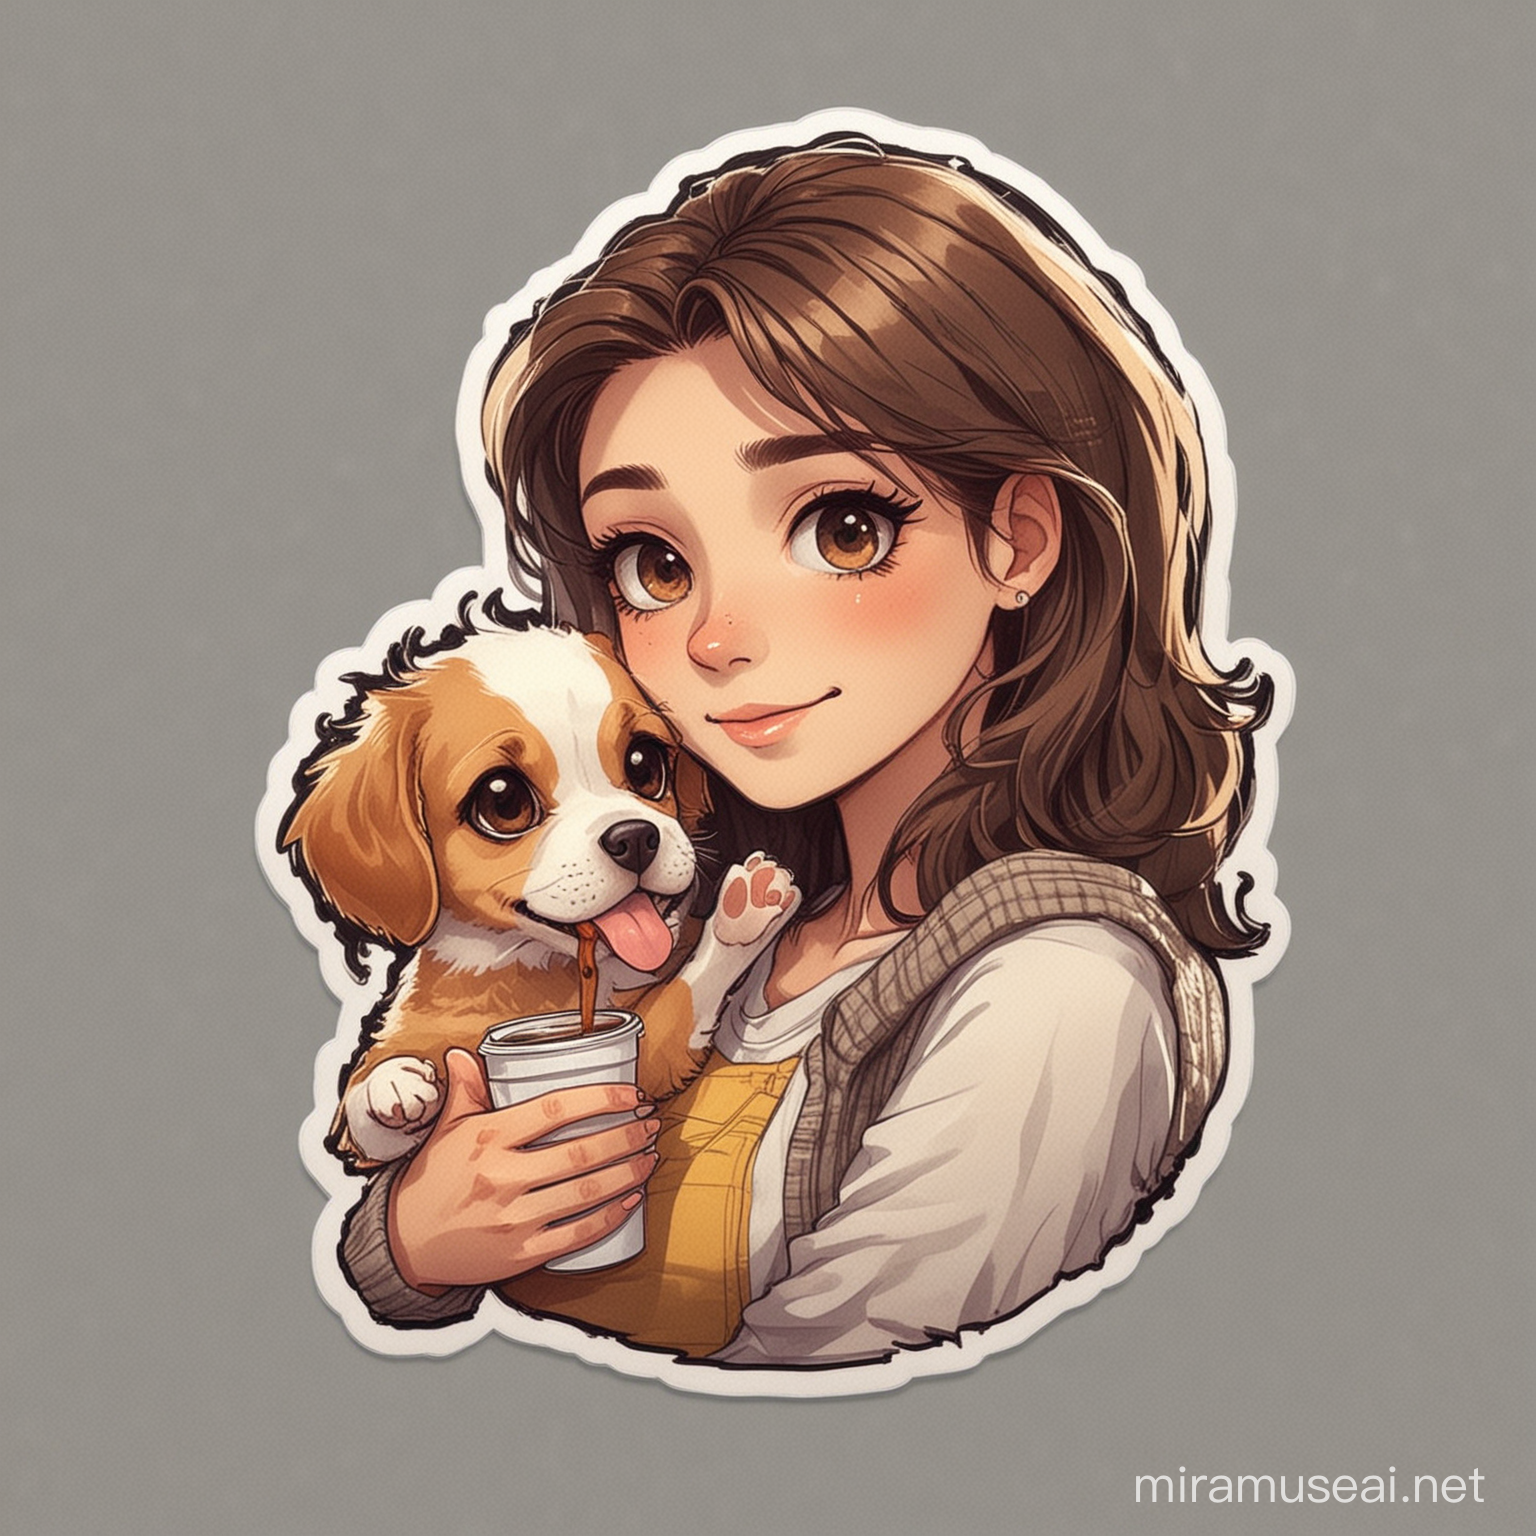 Girl with Coffee Cup Sticker Featuring Her Pet Dog